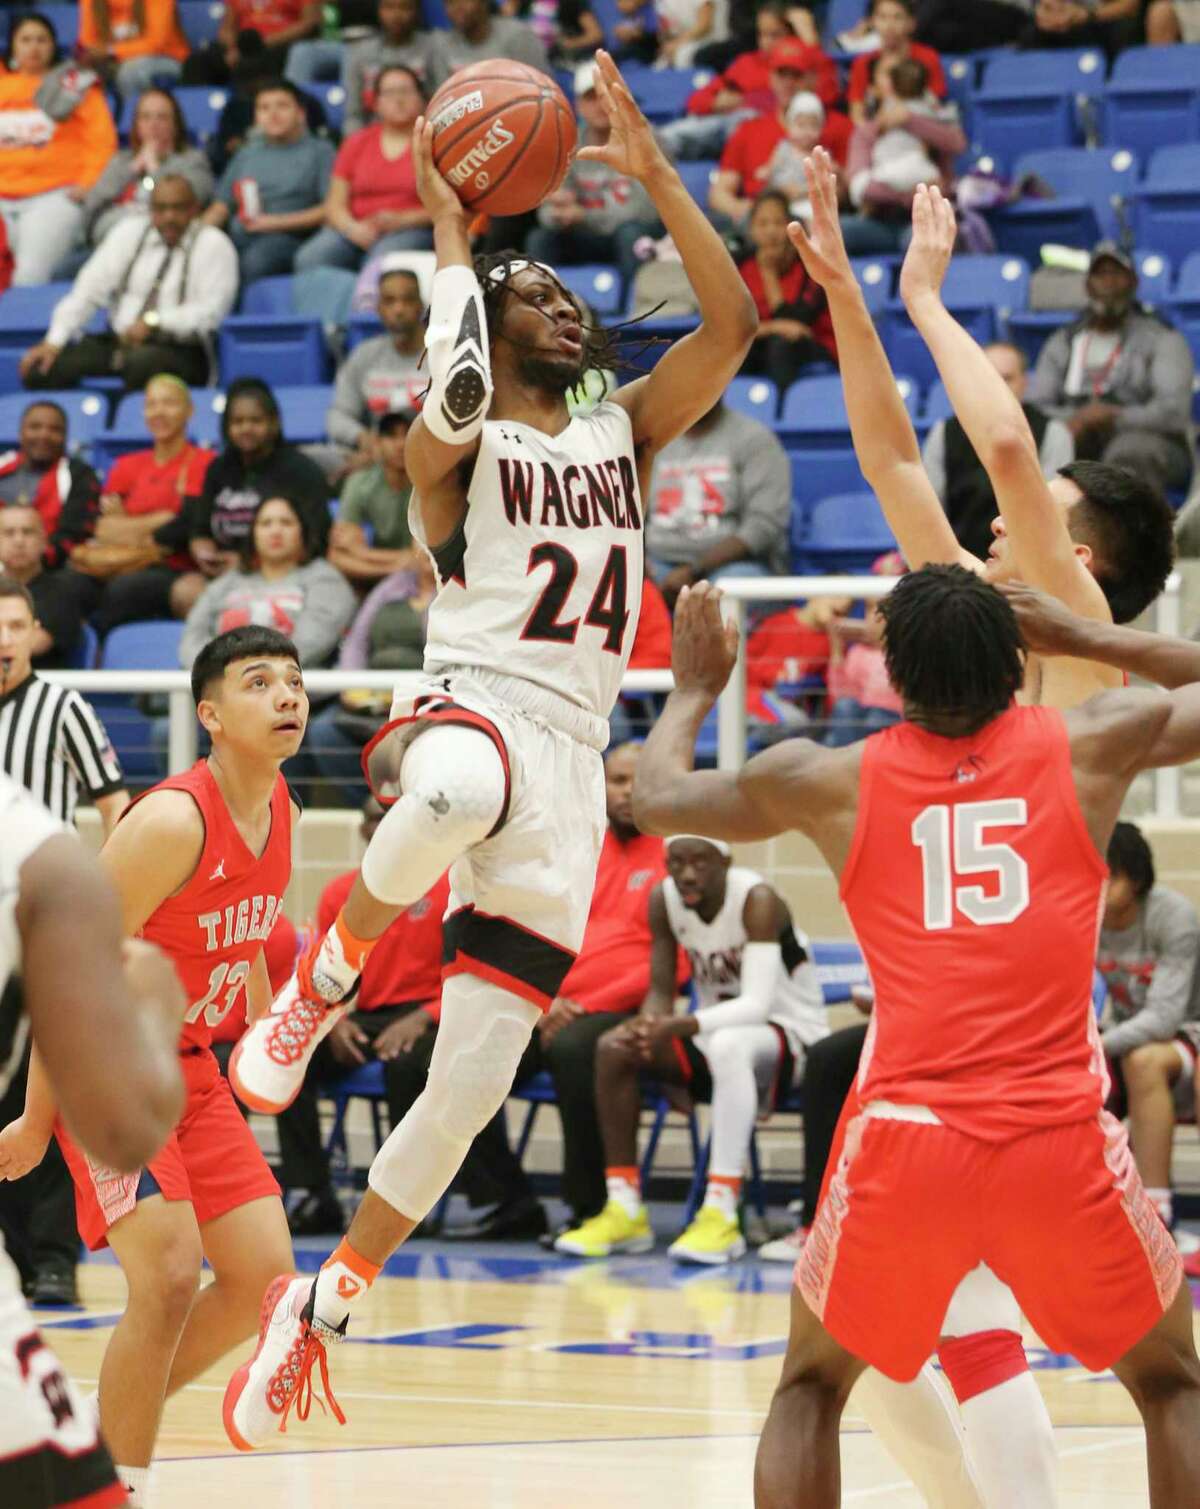 Wagner's Journee Phillips (24) attempts a score against Laredo Martin during their Boys 5A Regional semifinal basketball game on Friday, Mar. 6, 2020. Wagner defeated Laredo Martin, 58-47, to advance to the regional final game.